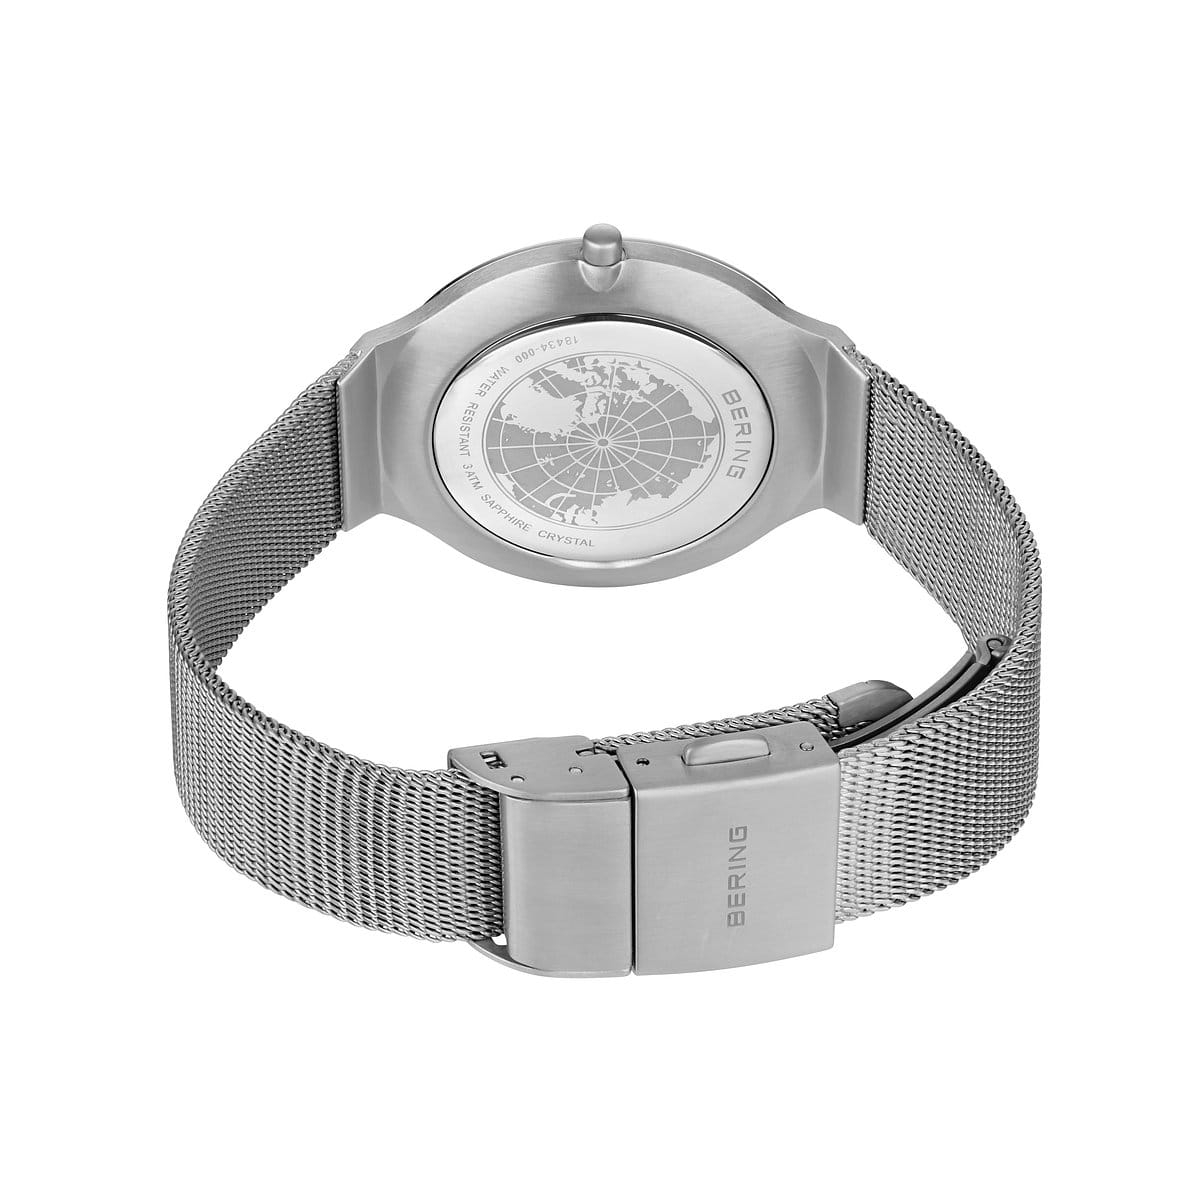 Bering Ultra Slim Collection 18434-000